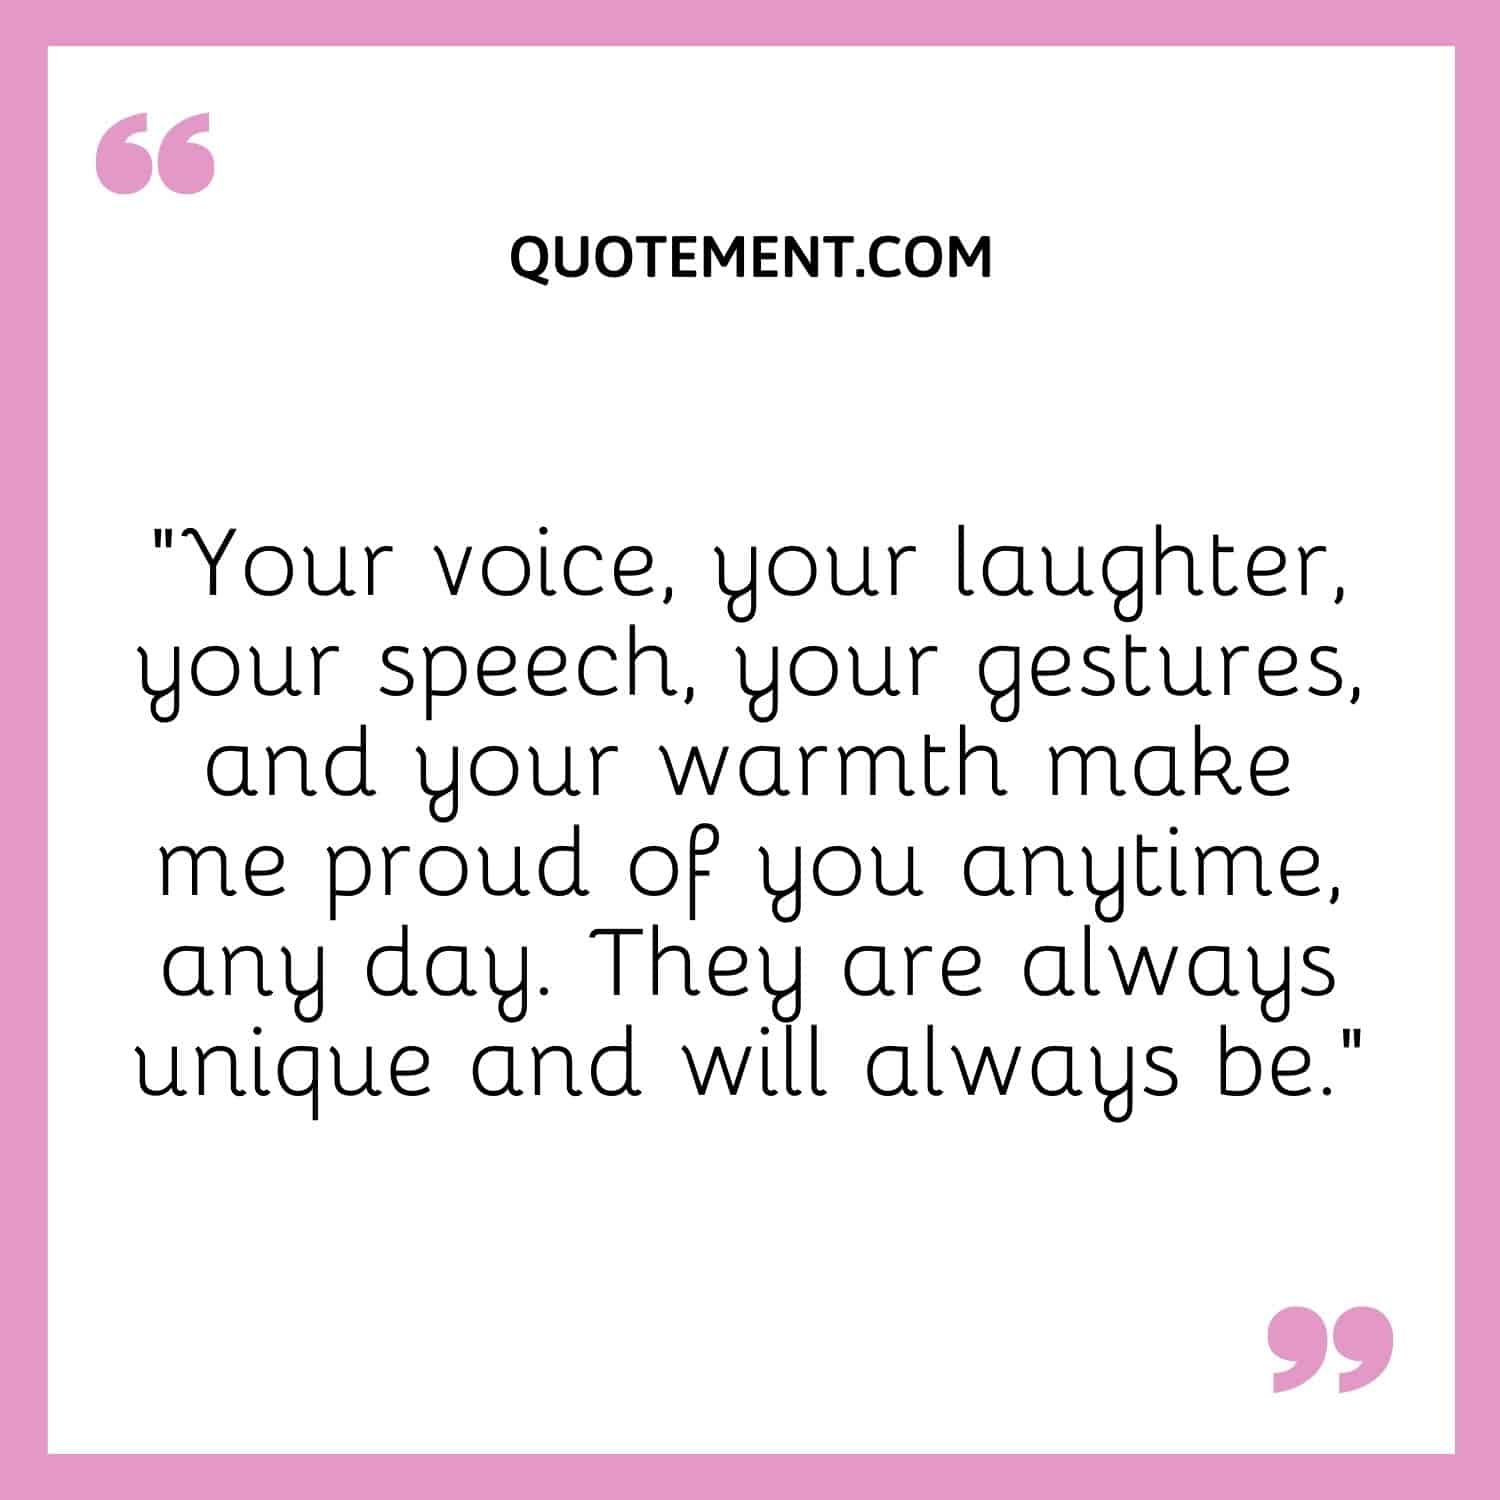 “Your voice, your laughter, your speech, your gestures, and your warmth make me proud of you anytime, any day. They are always unique and will always be.”